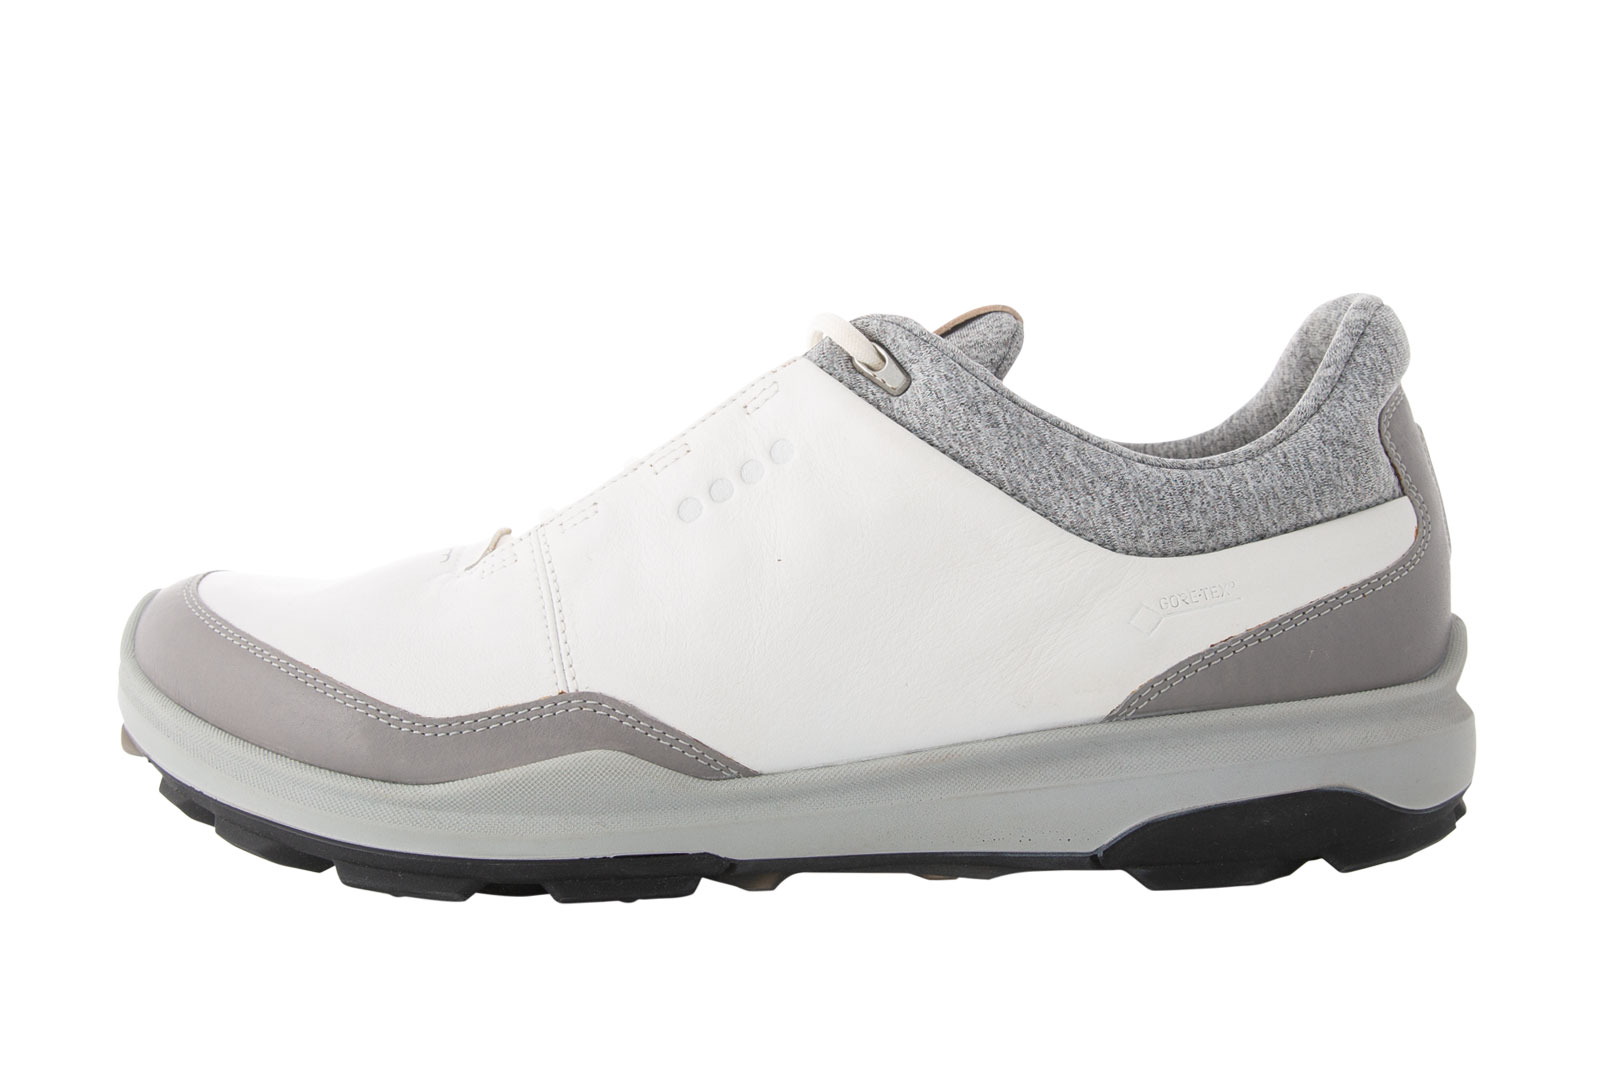 25 Years of ECCO Golf, 2018: BIOM HYBRID 3 the shoe started an new era in ECCO GOLF's design with the GORE-TEX construction